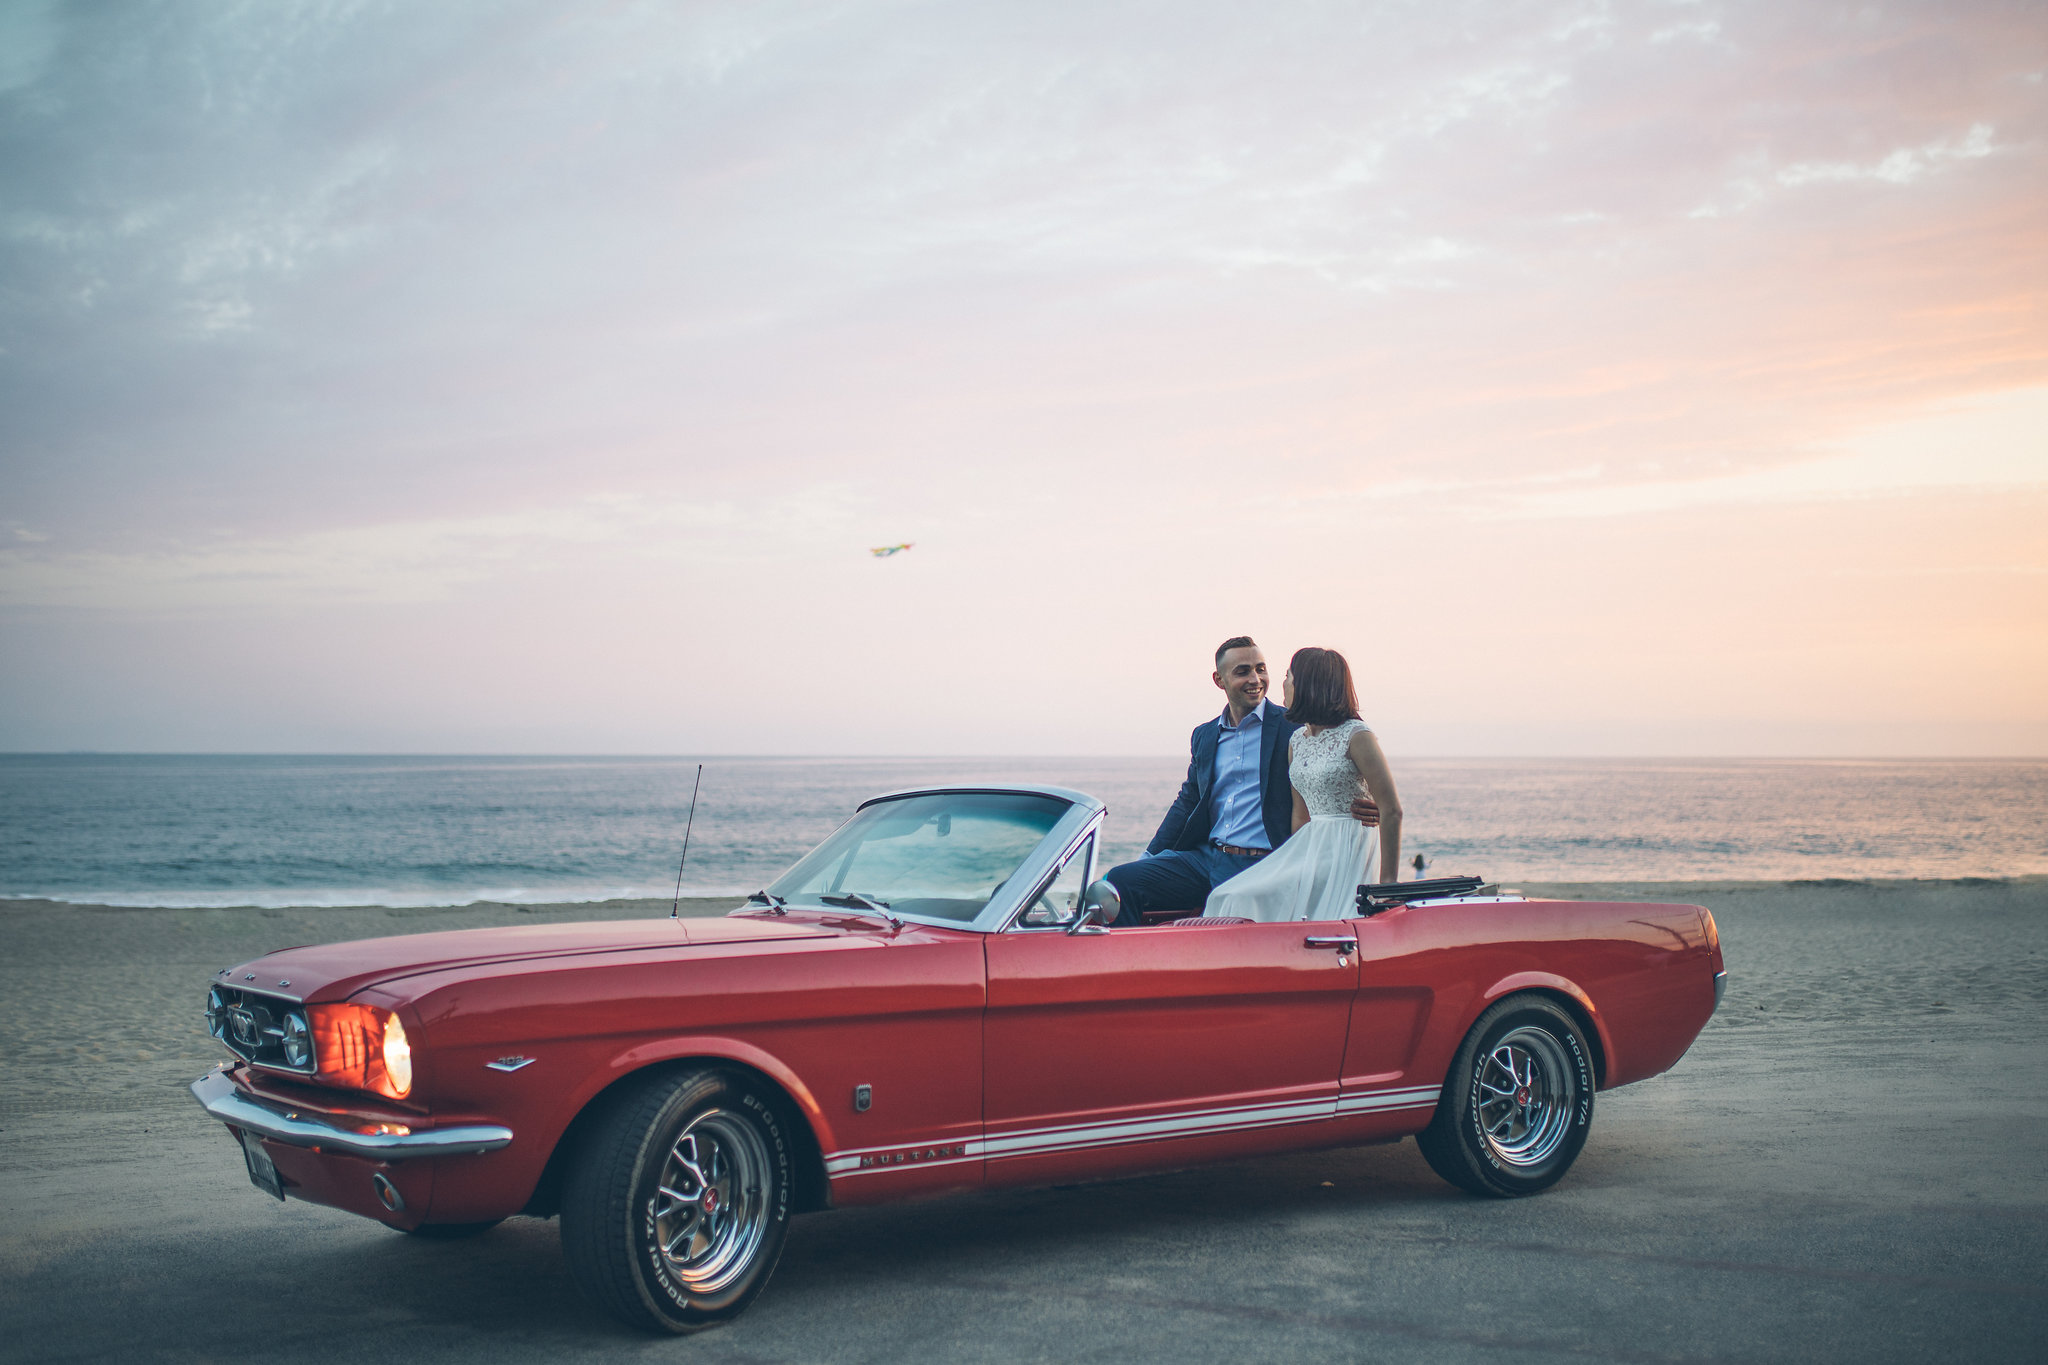   Grant &amp; Sarah   Point Dume State Beach Elopement  in Malibu, Calif.   View gallery  